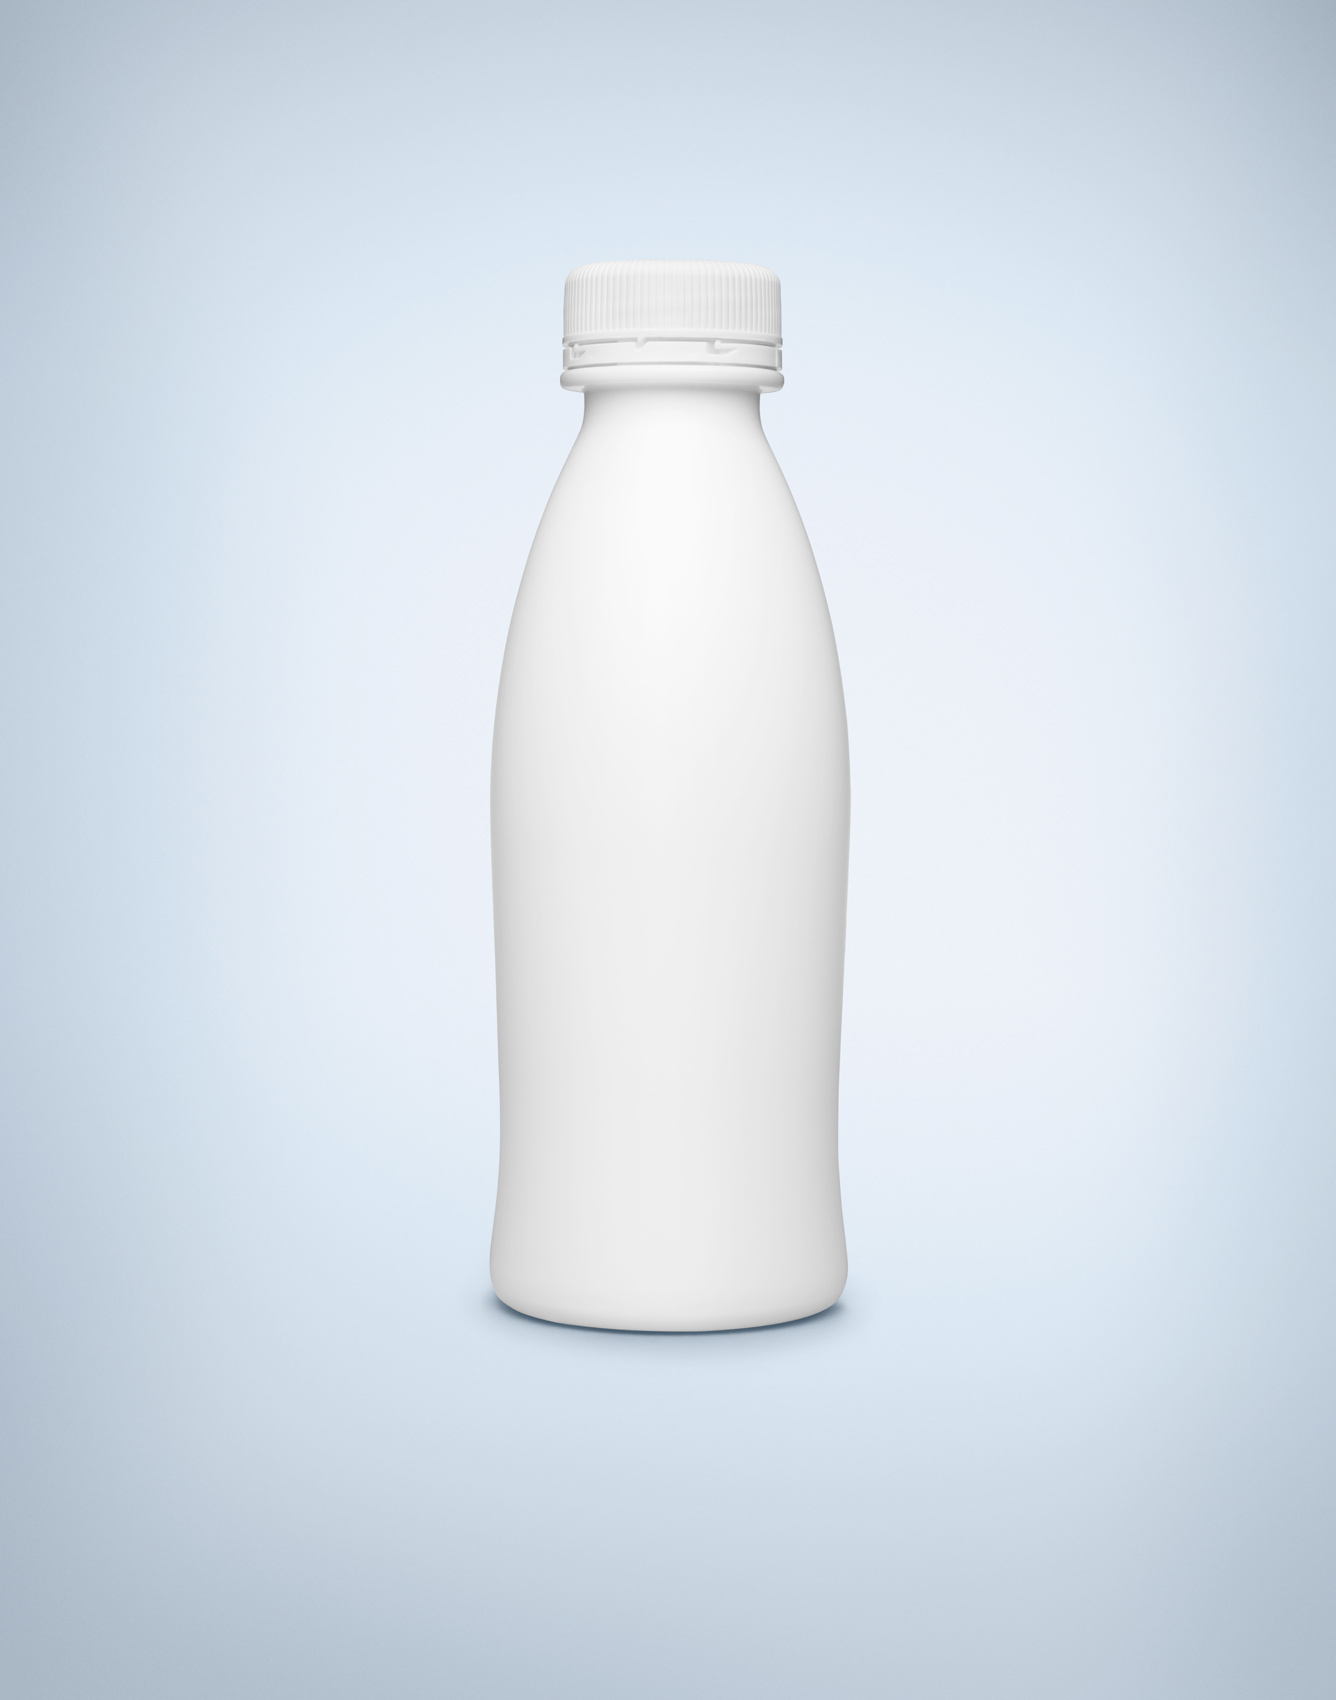 Milk bottle by Alexander Kent London based still life and product photographer.